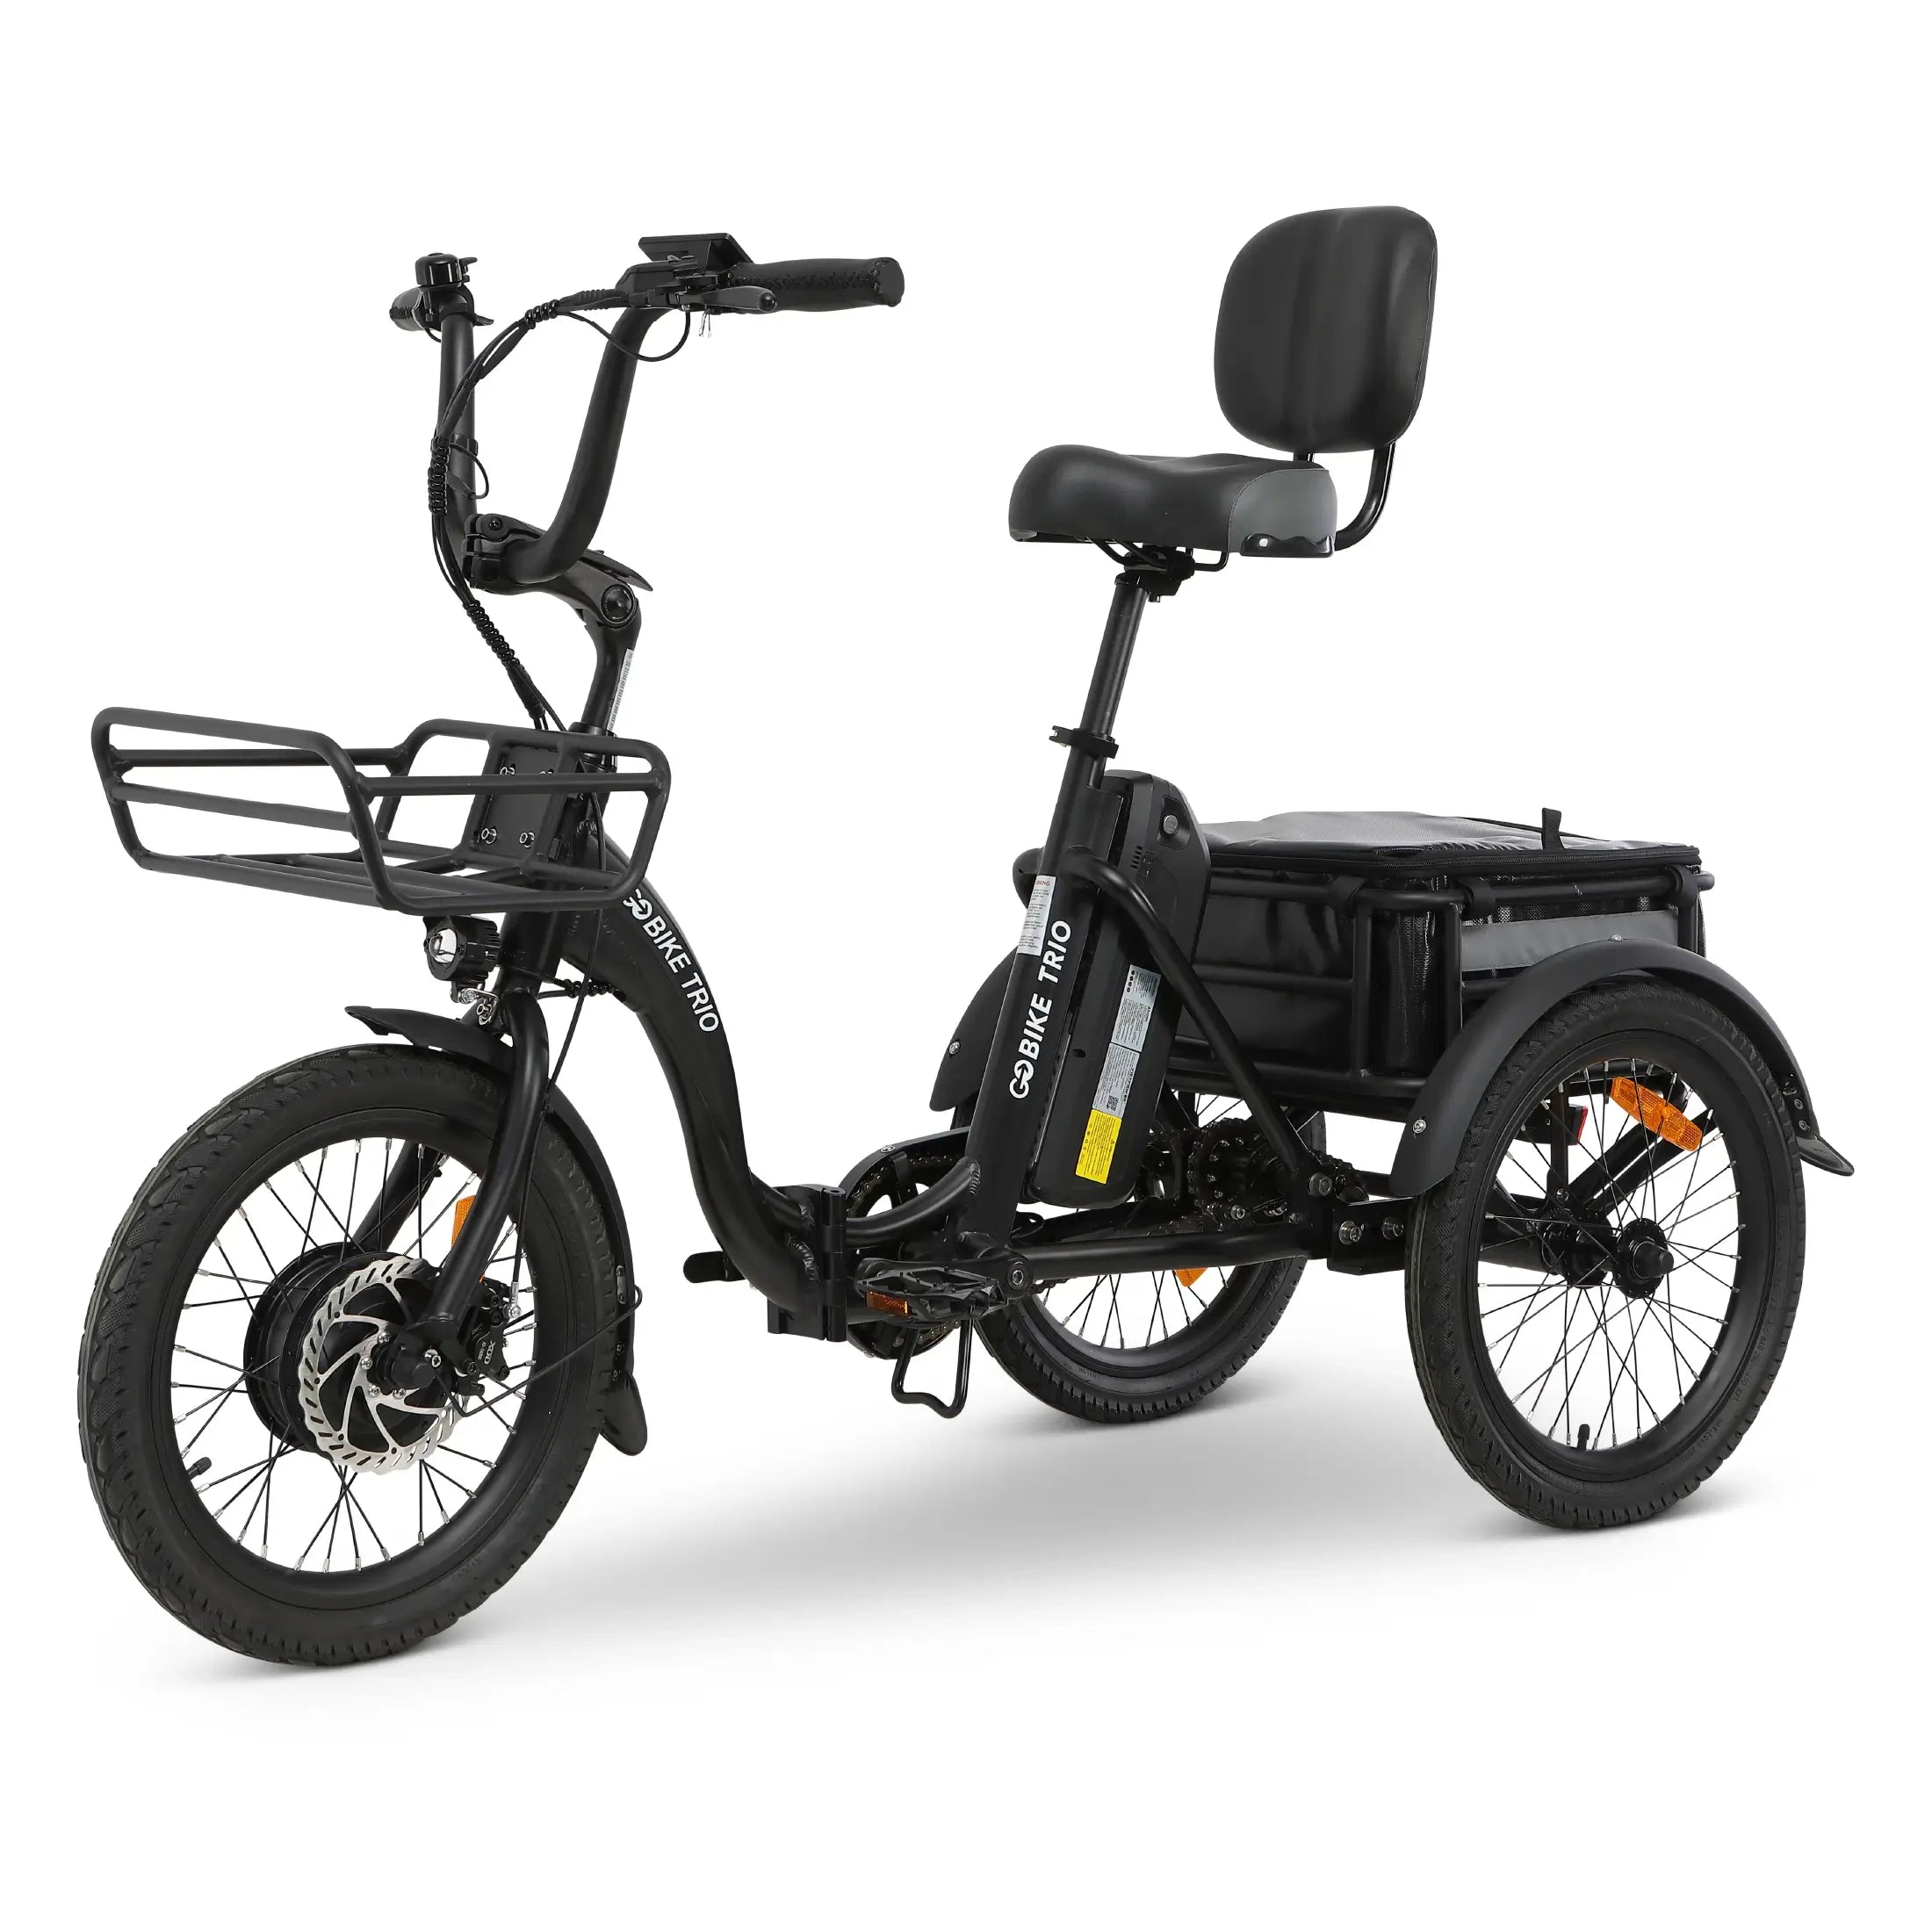 TRIO Crossover Lightweight Foldable Electric Tricycle